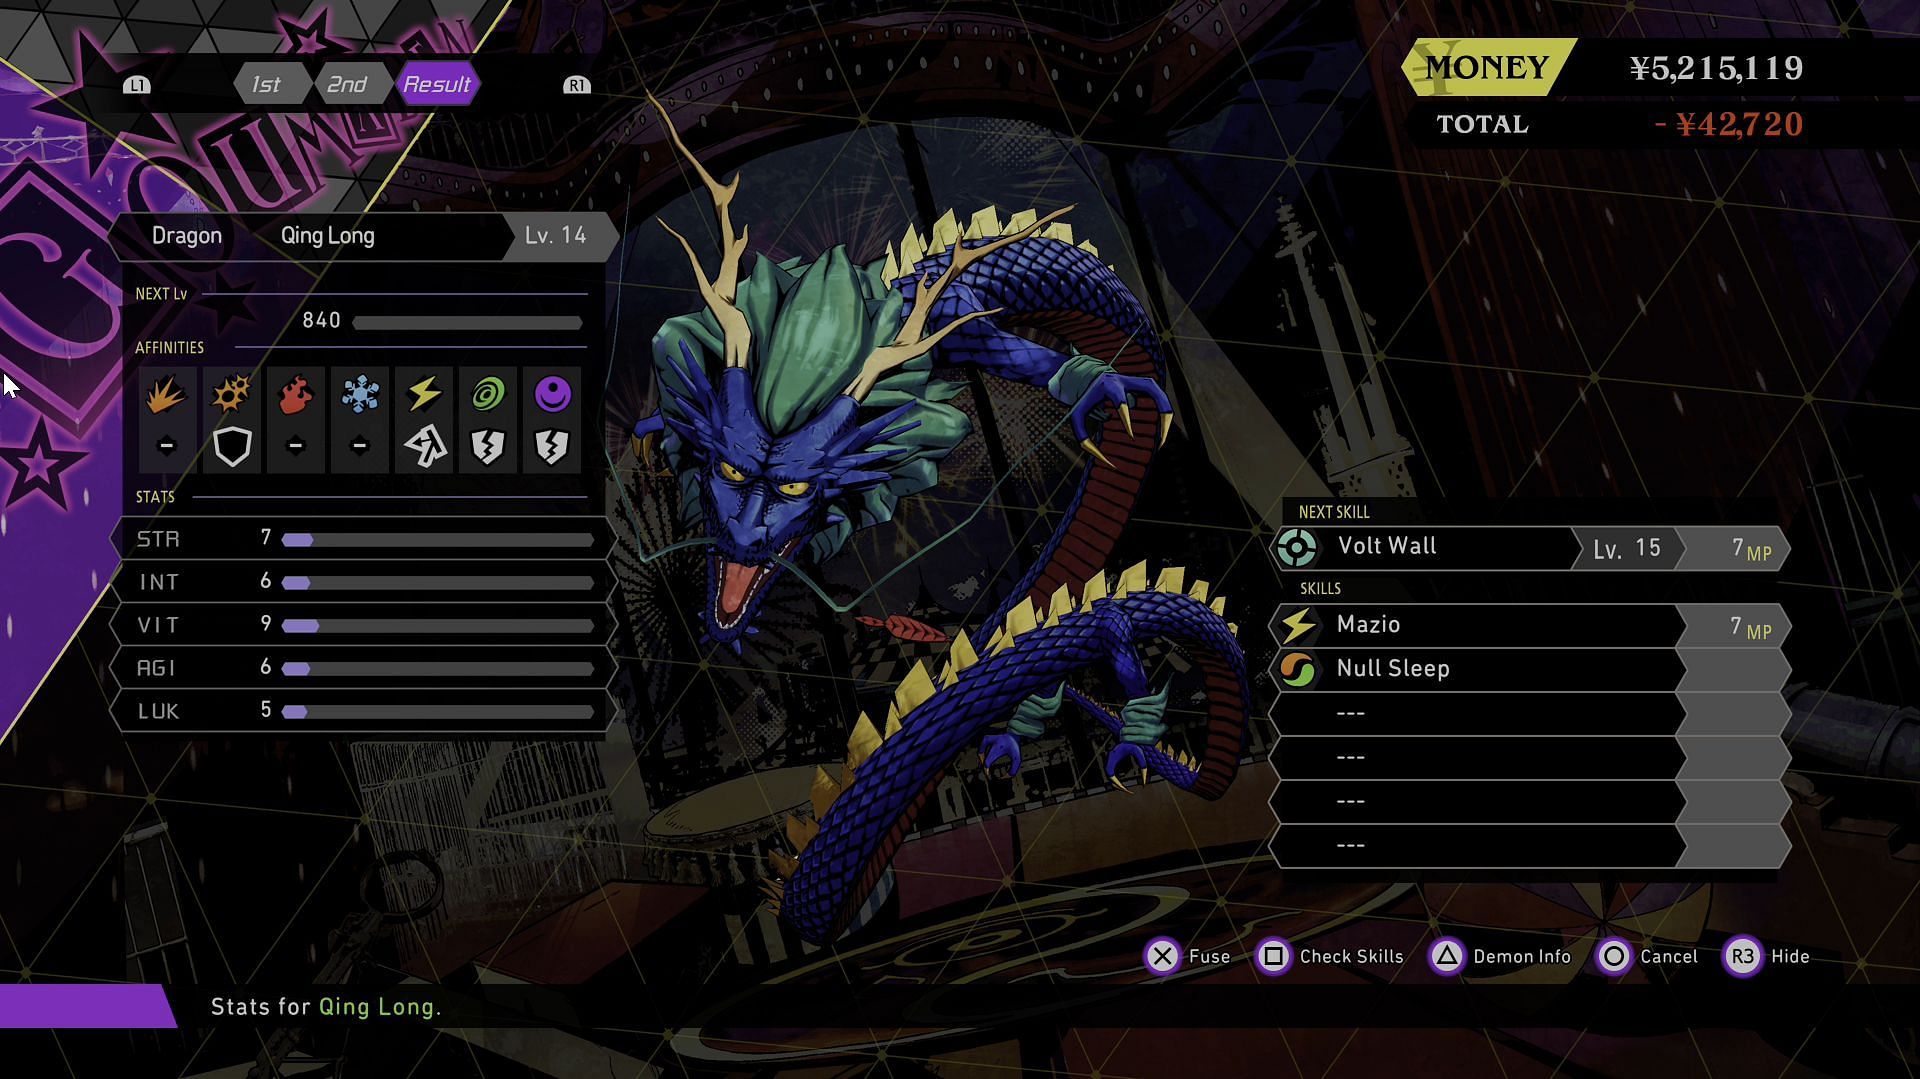 Qing Long can be summoned to make light work of electric foes (Image via Atlus)